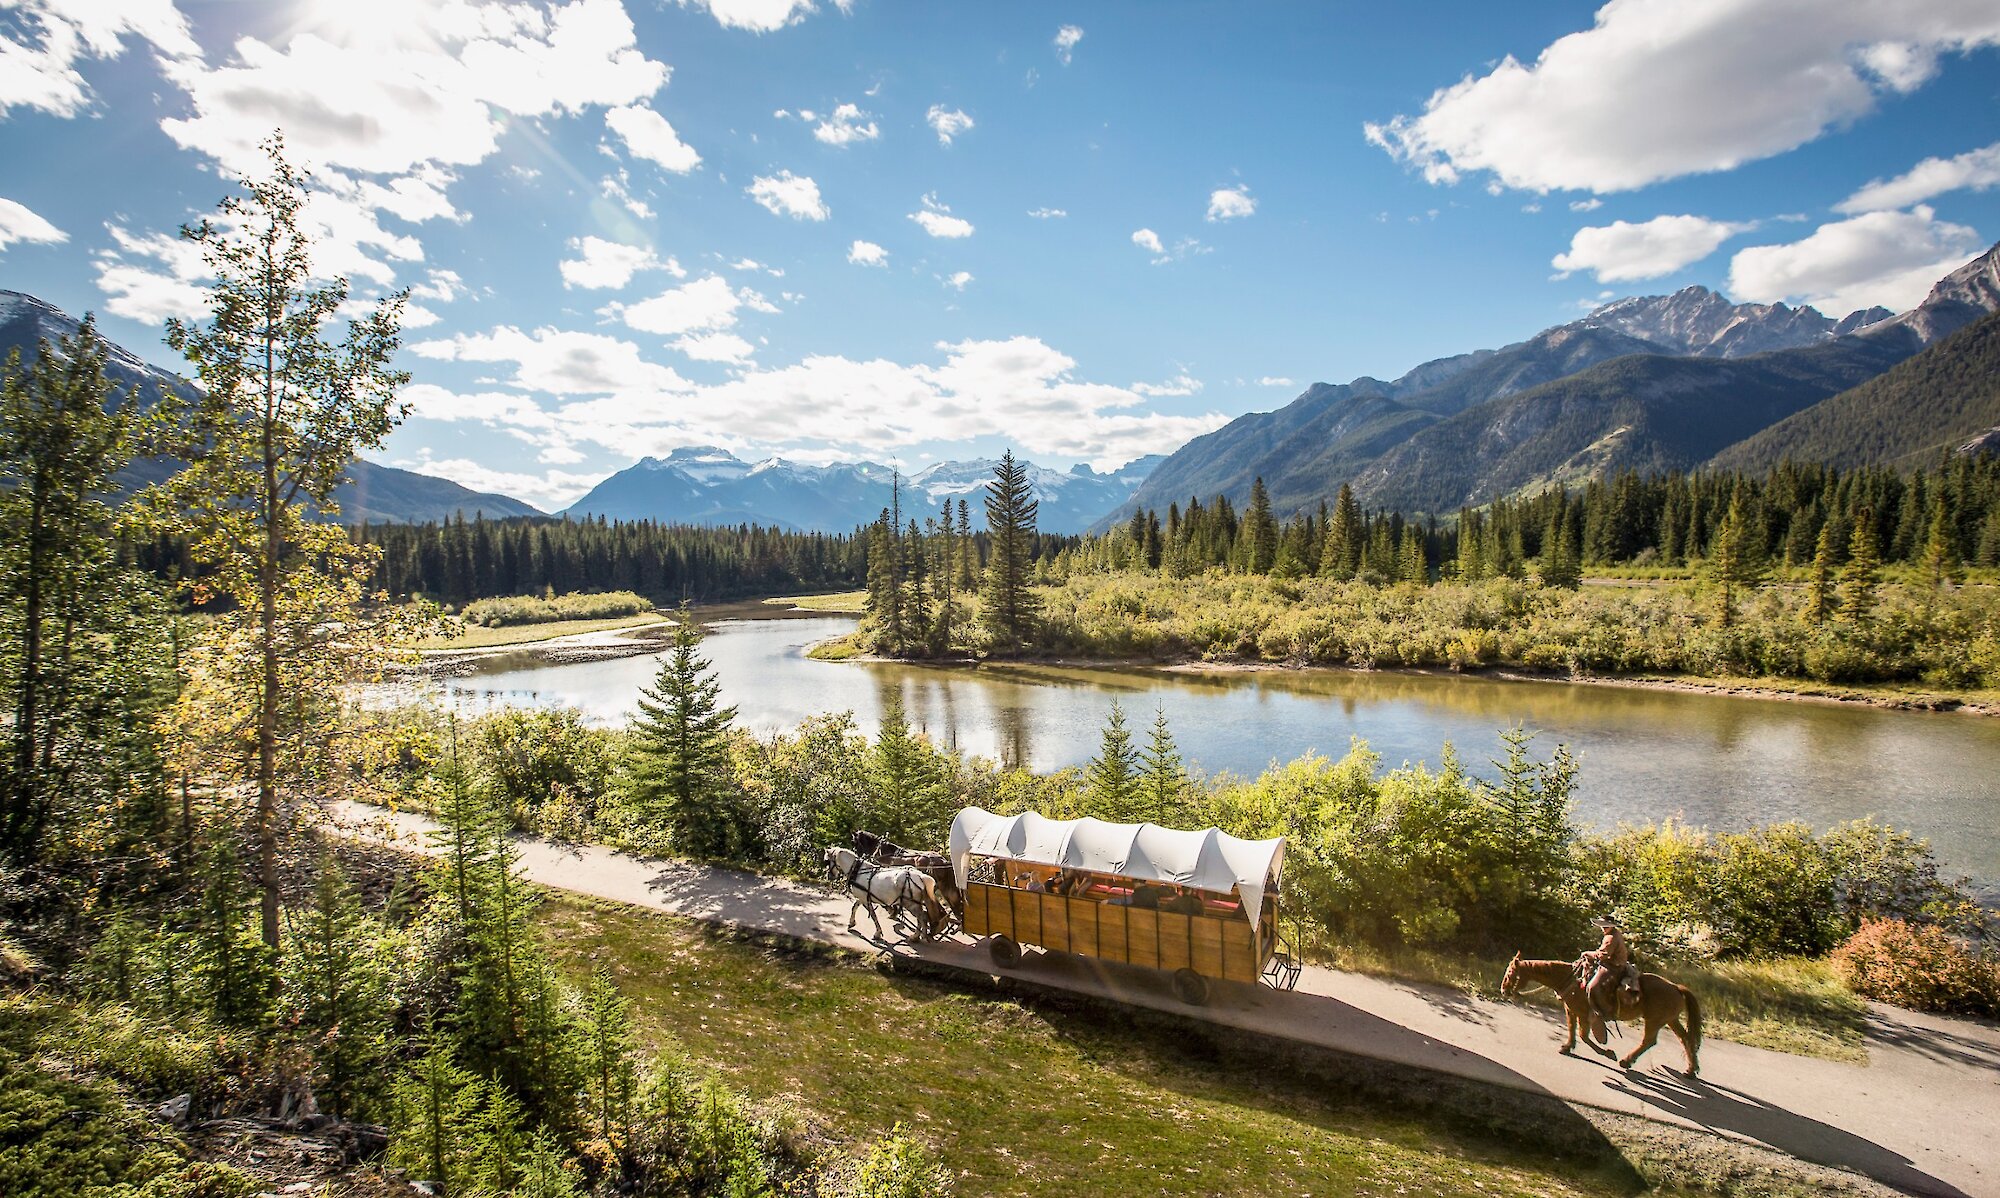 A horse drawn wagon ride along the Bow River In Banff